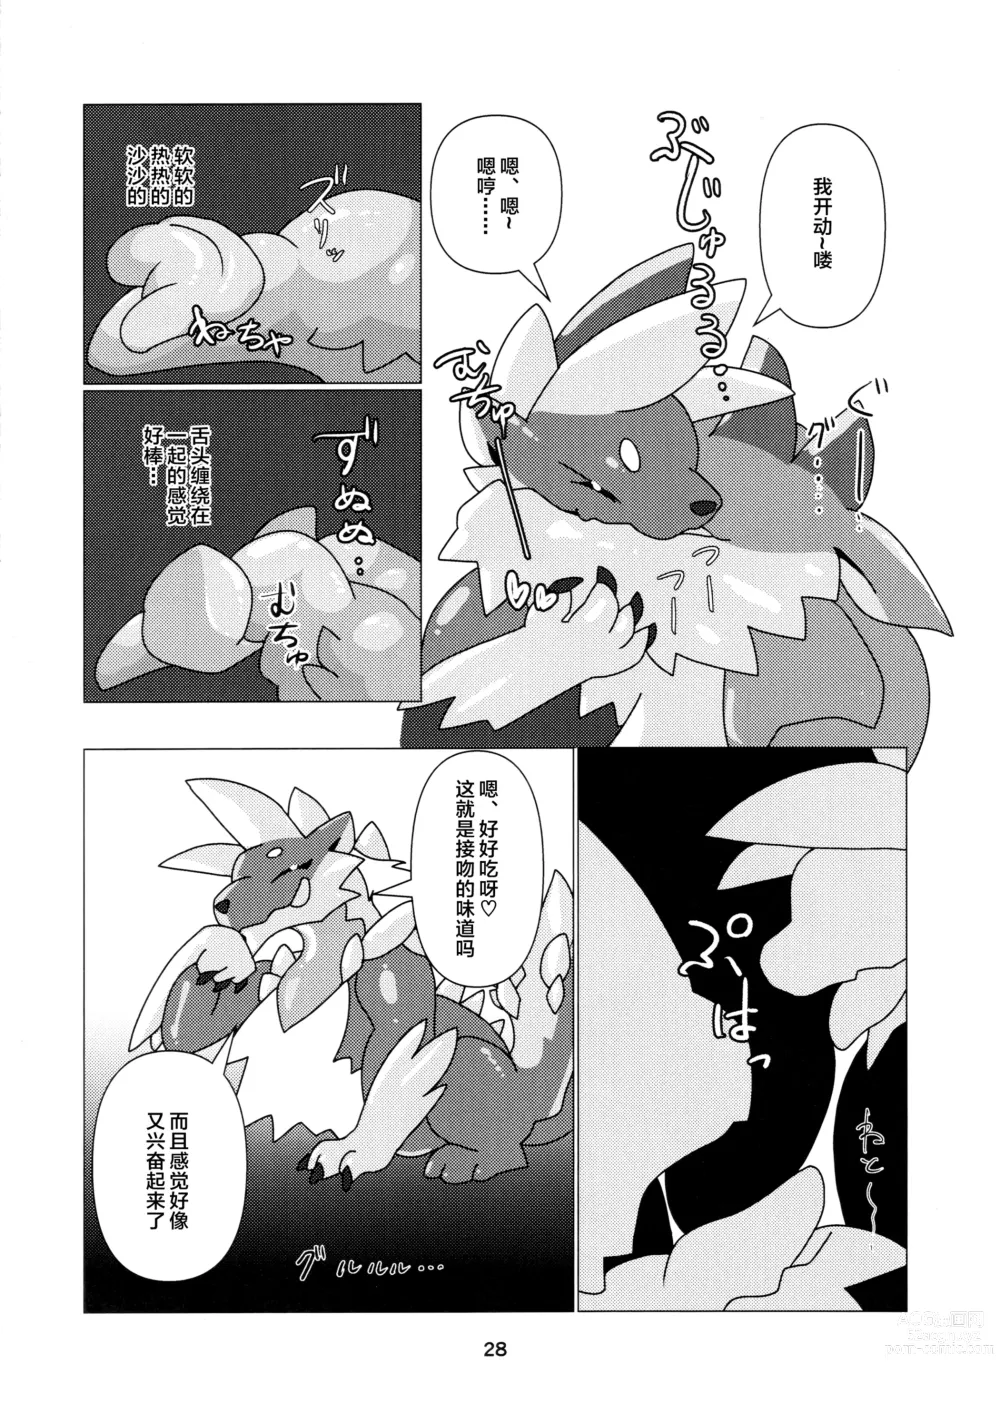 Page 26 of doujinshi 溪流的睡美人